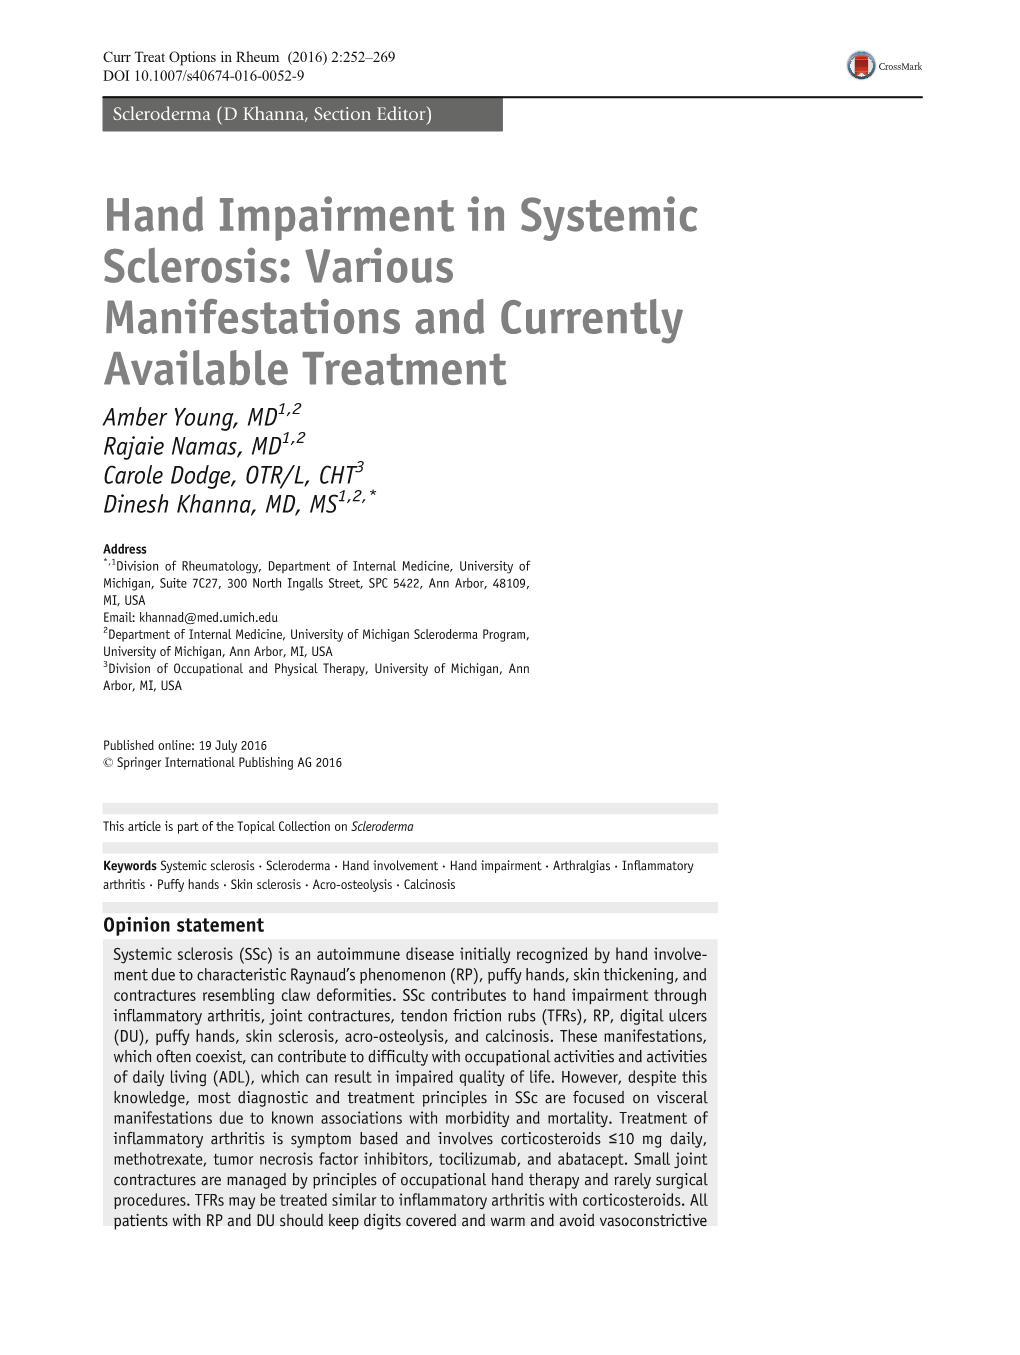 Hand Impairment in Systemic Sclerosis: Various Manifestations